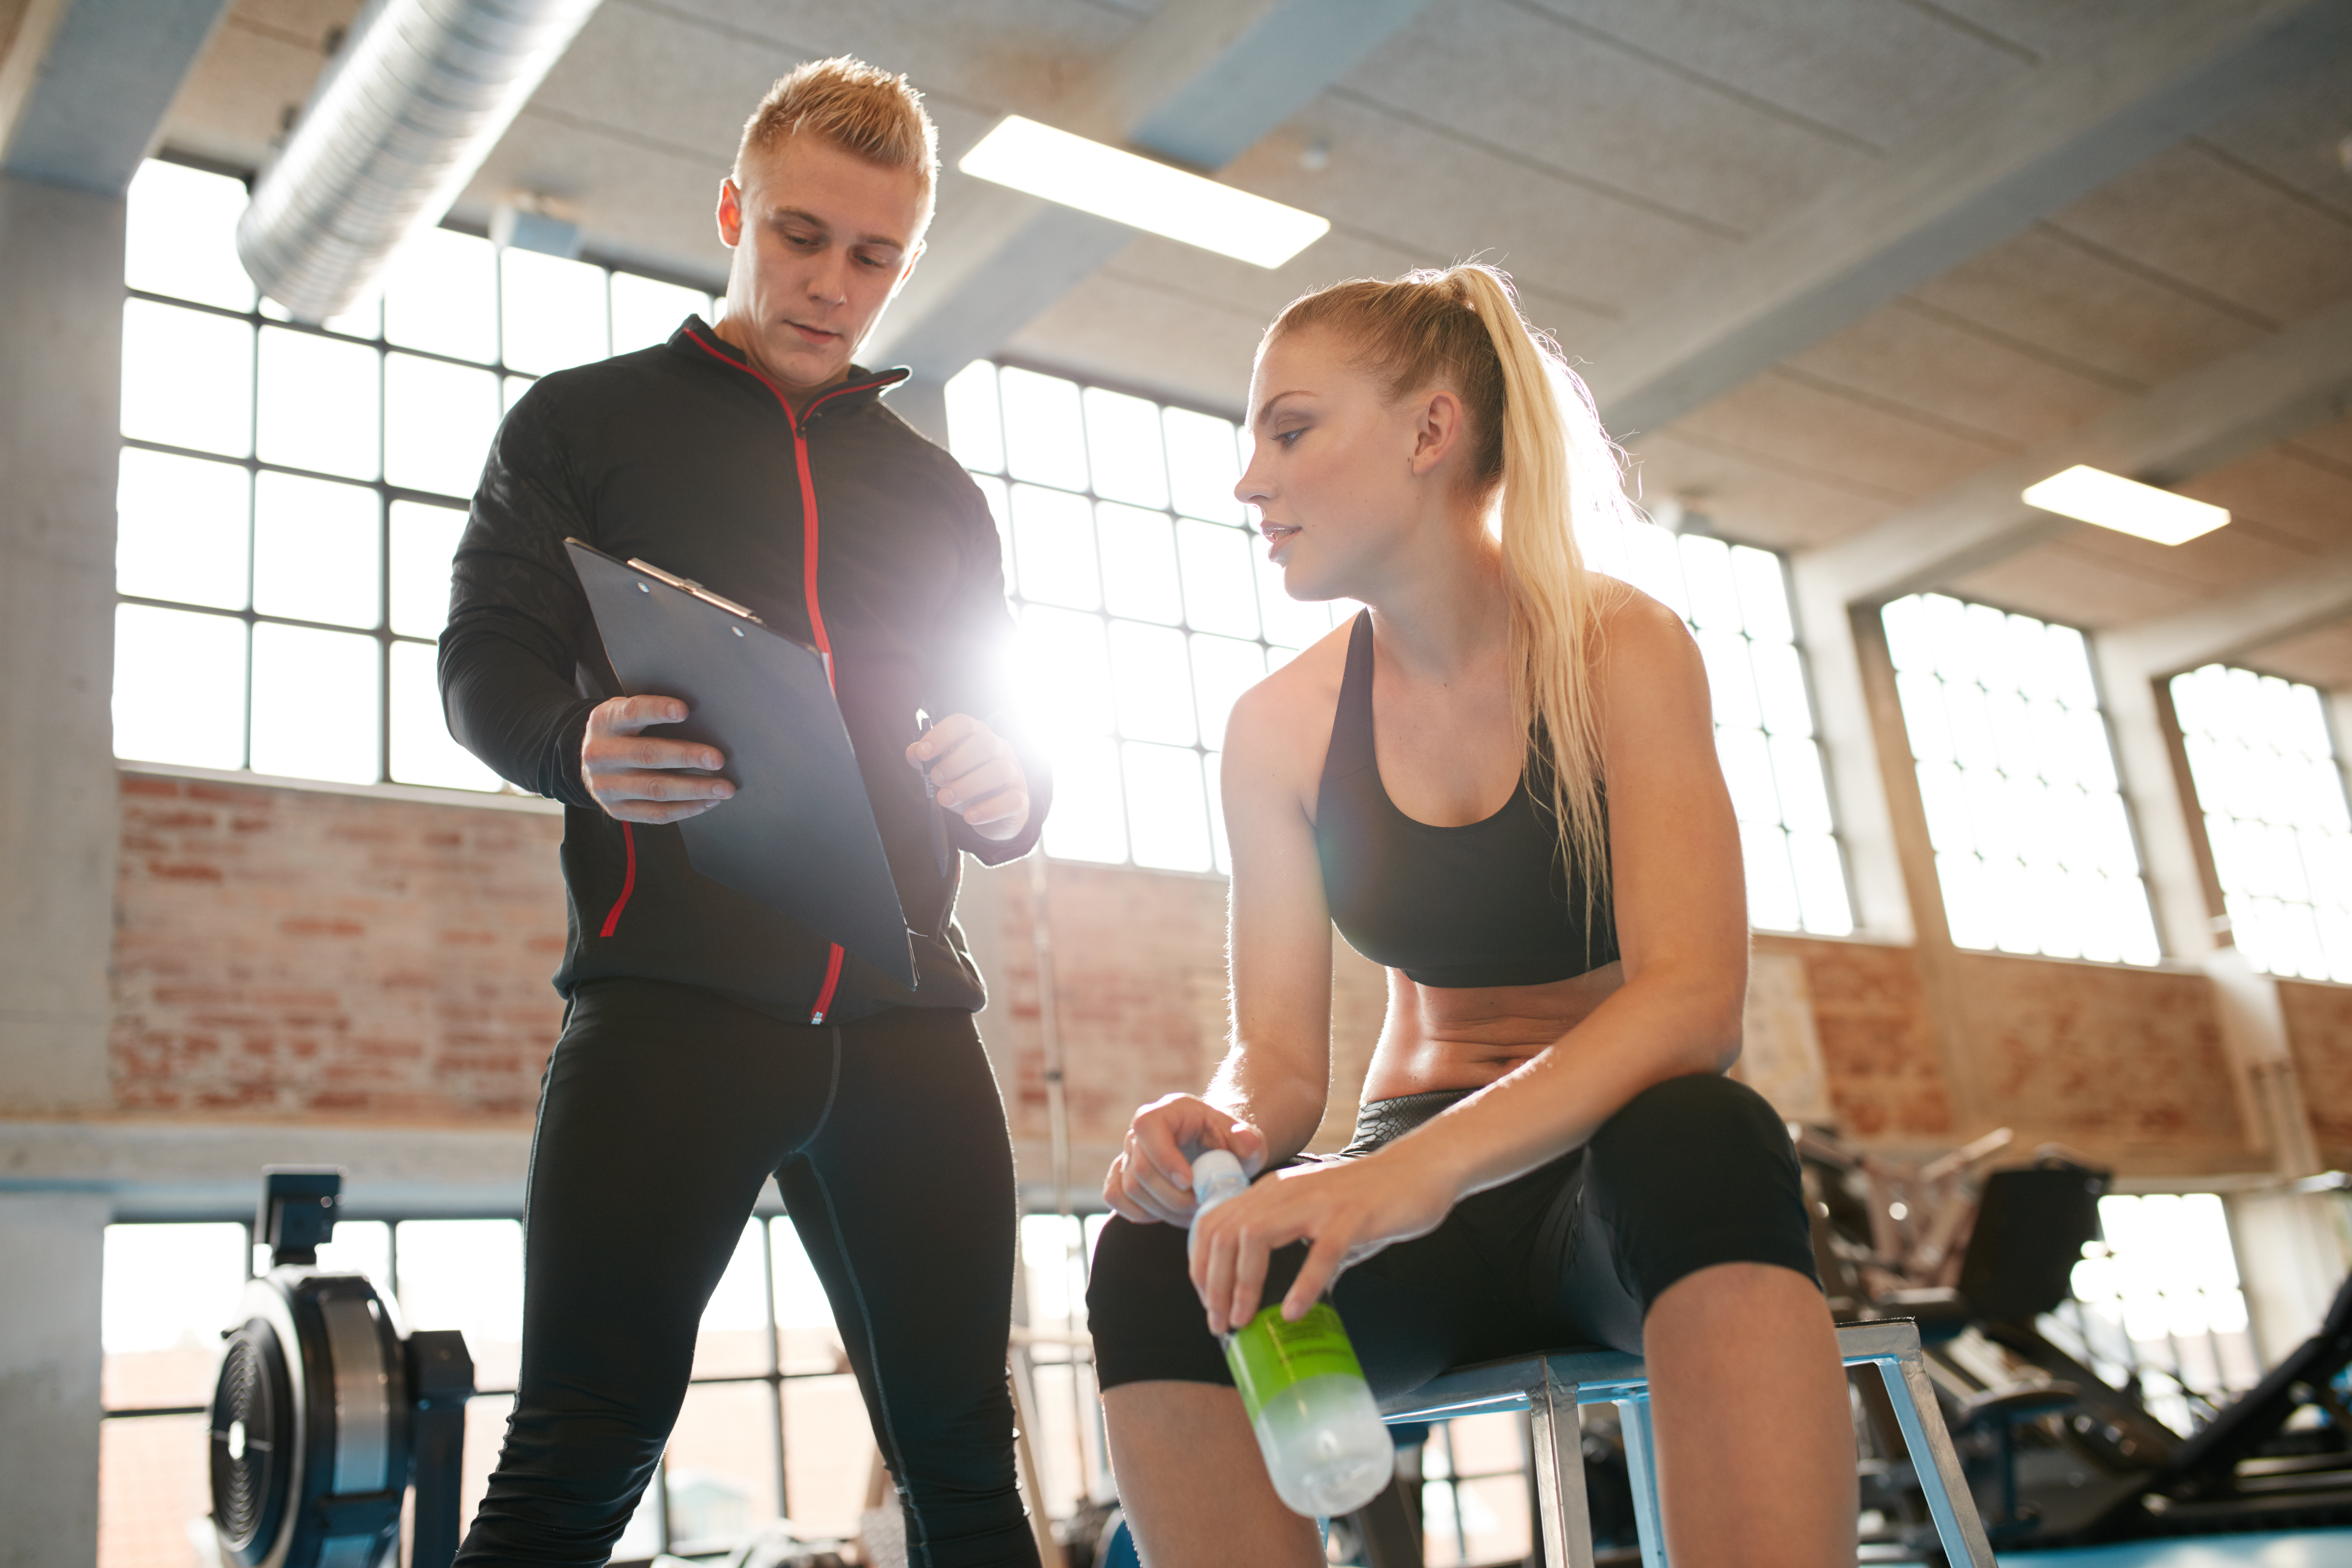 What should a coach really know about his athletes to help improve  performance? – Metrifit Ready to Perform